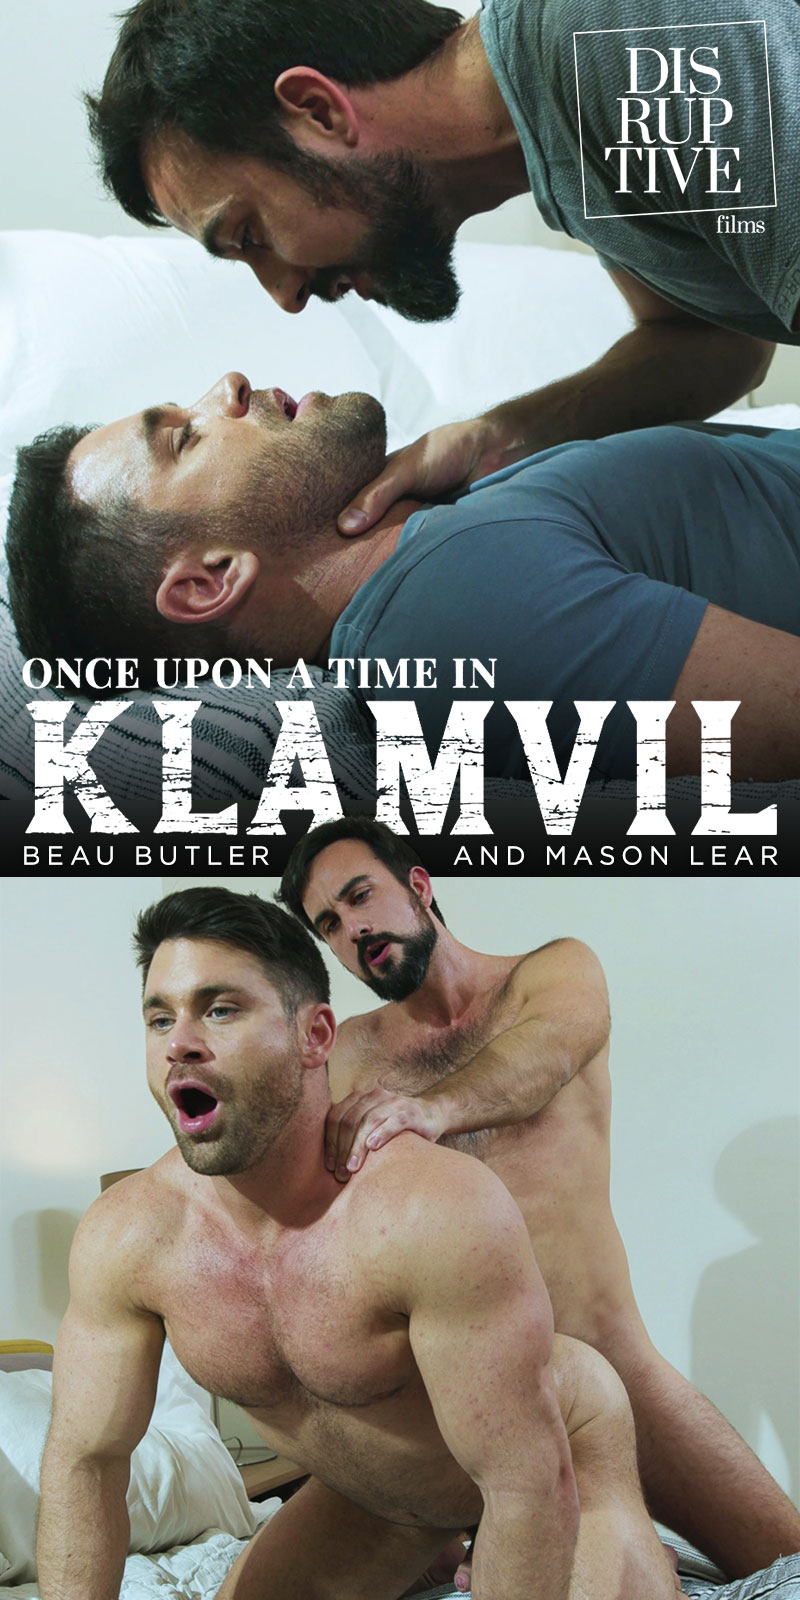 800px x 1600px - Disruptive Films: Once Upon a Time in Klamvil (Mason Lear & Beau Butler) |  Fagalicious - Gay Porn Blog